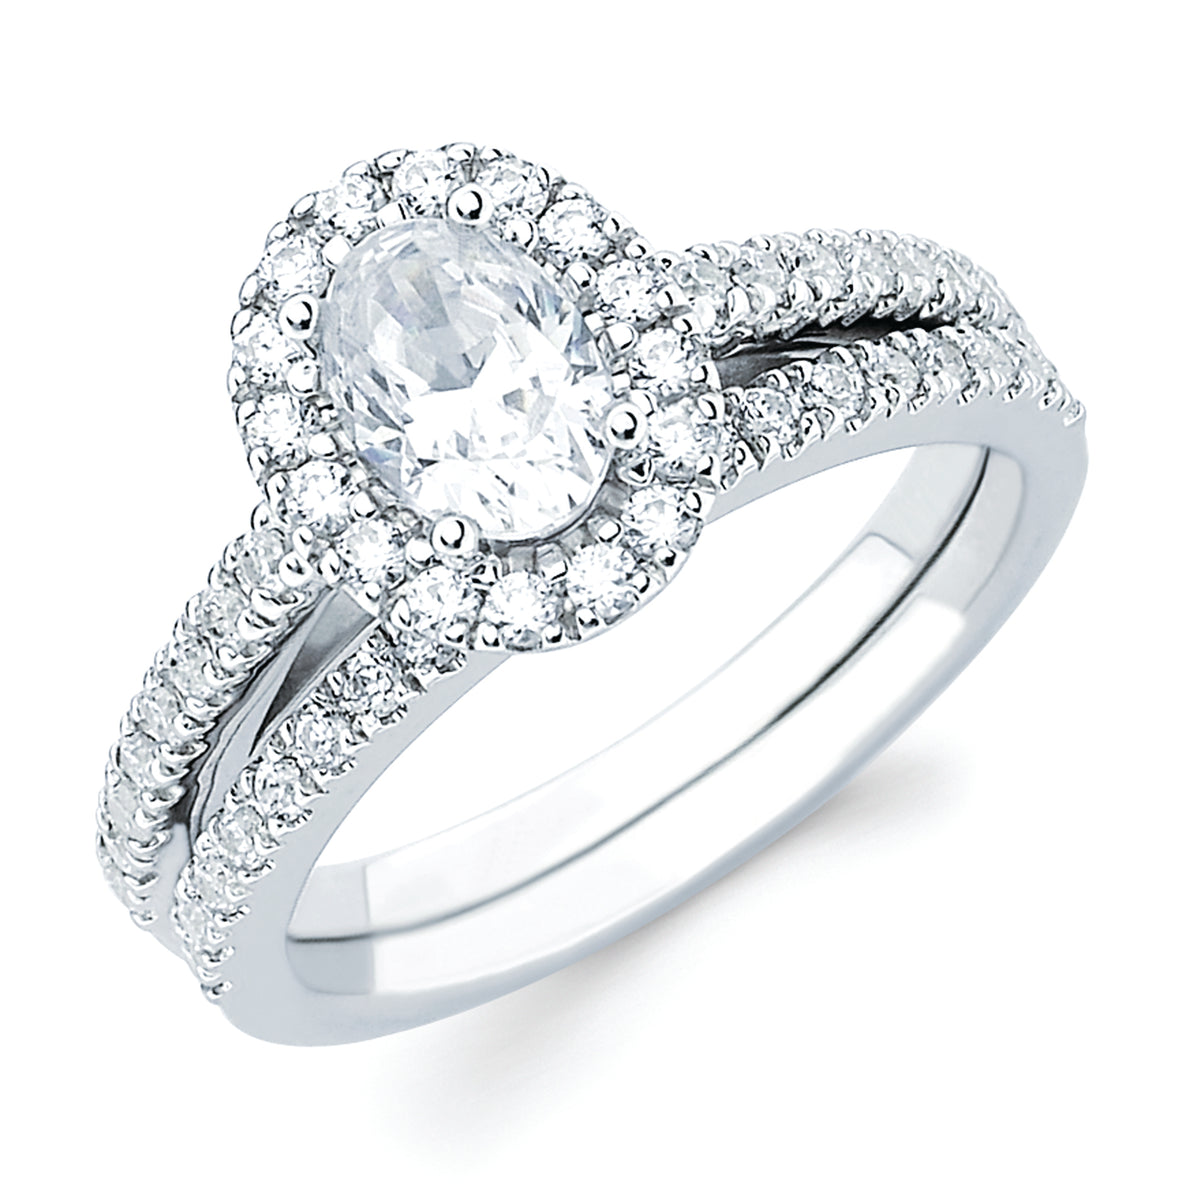 Halo Bridal: 3/8 Ctw. Diamond Halo Semi Mount available for 3/4 Ct. Oval Center Diamond in 14K Gold